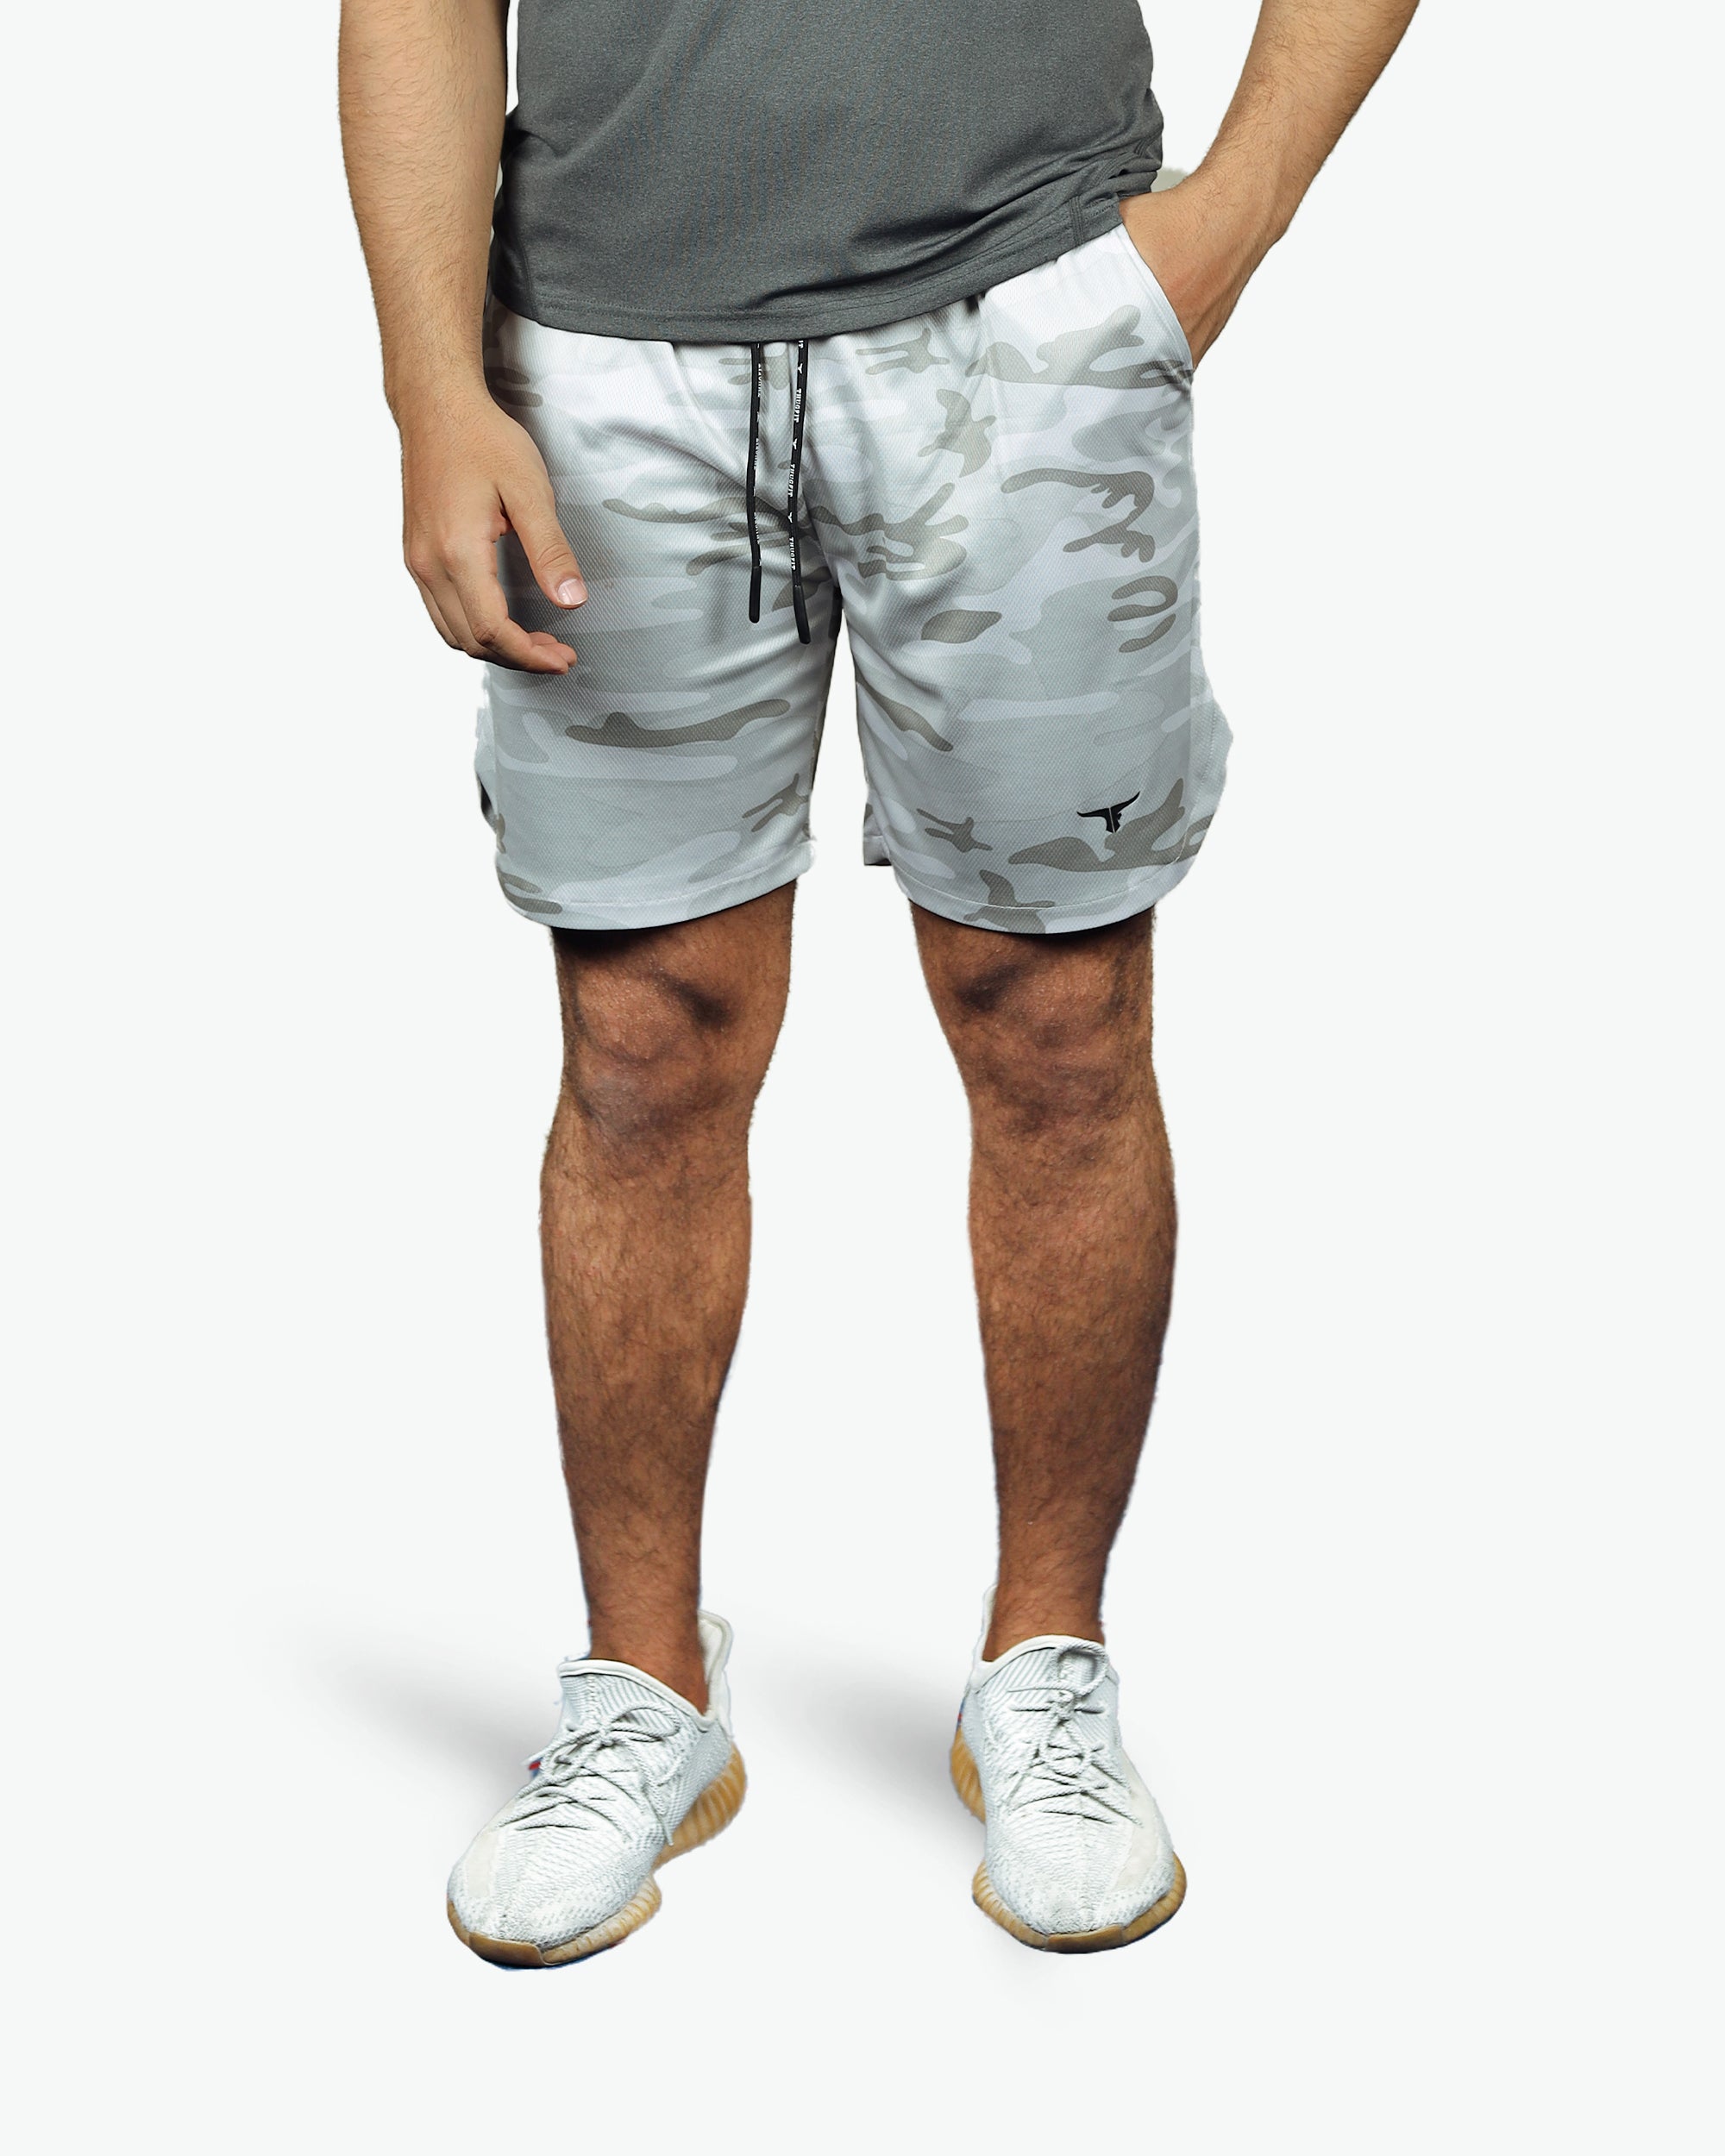 SprintHint 2 in 1 Shorts 9" Inseam - THUGFIT